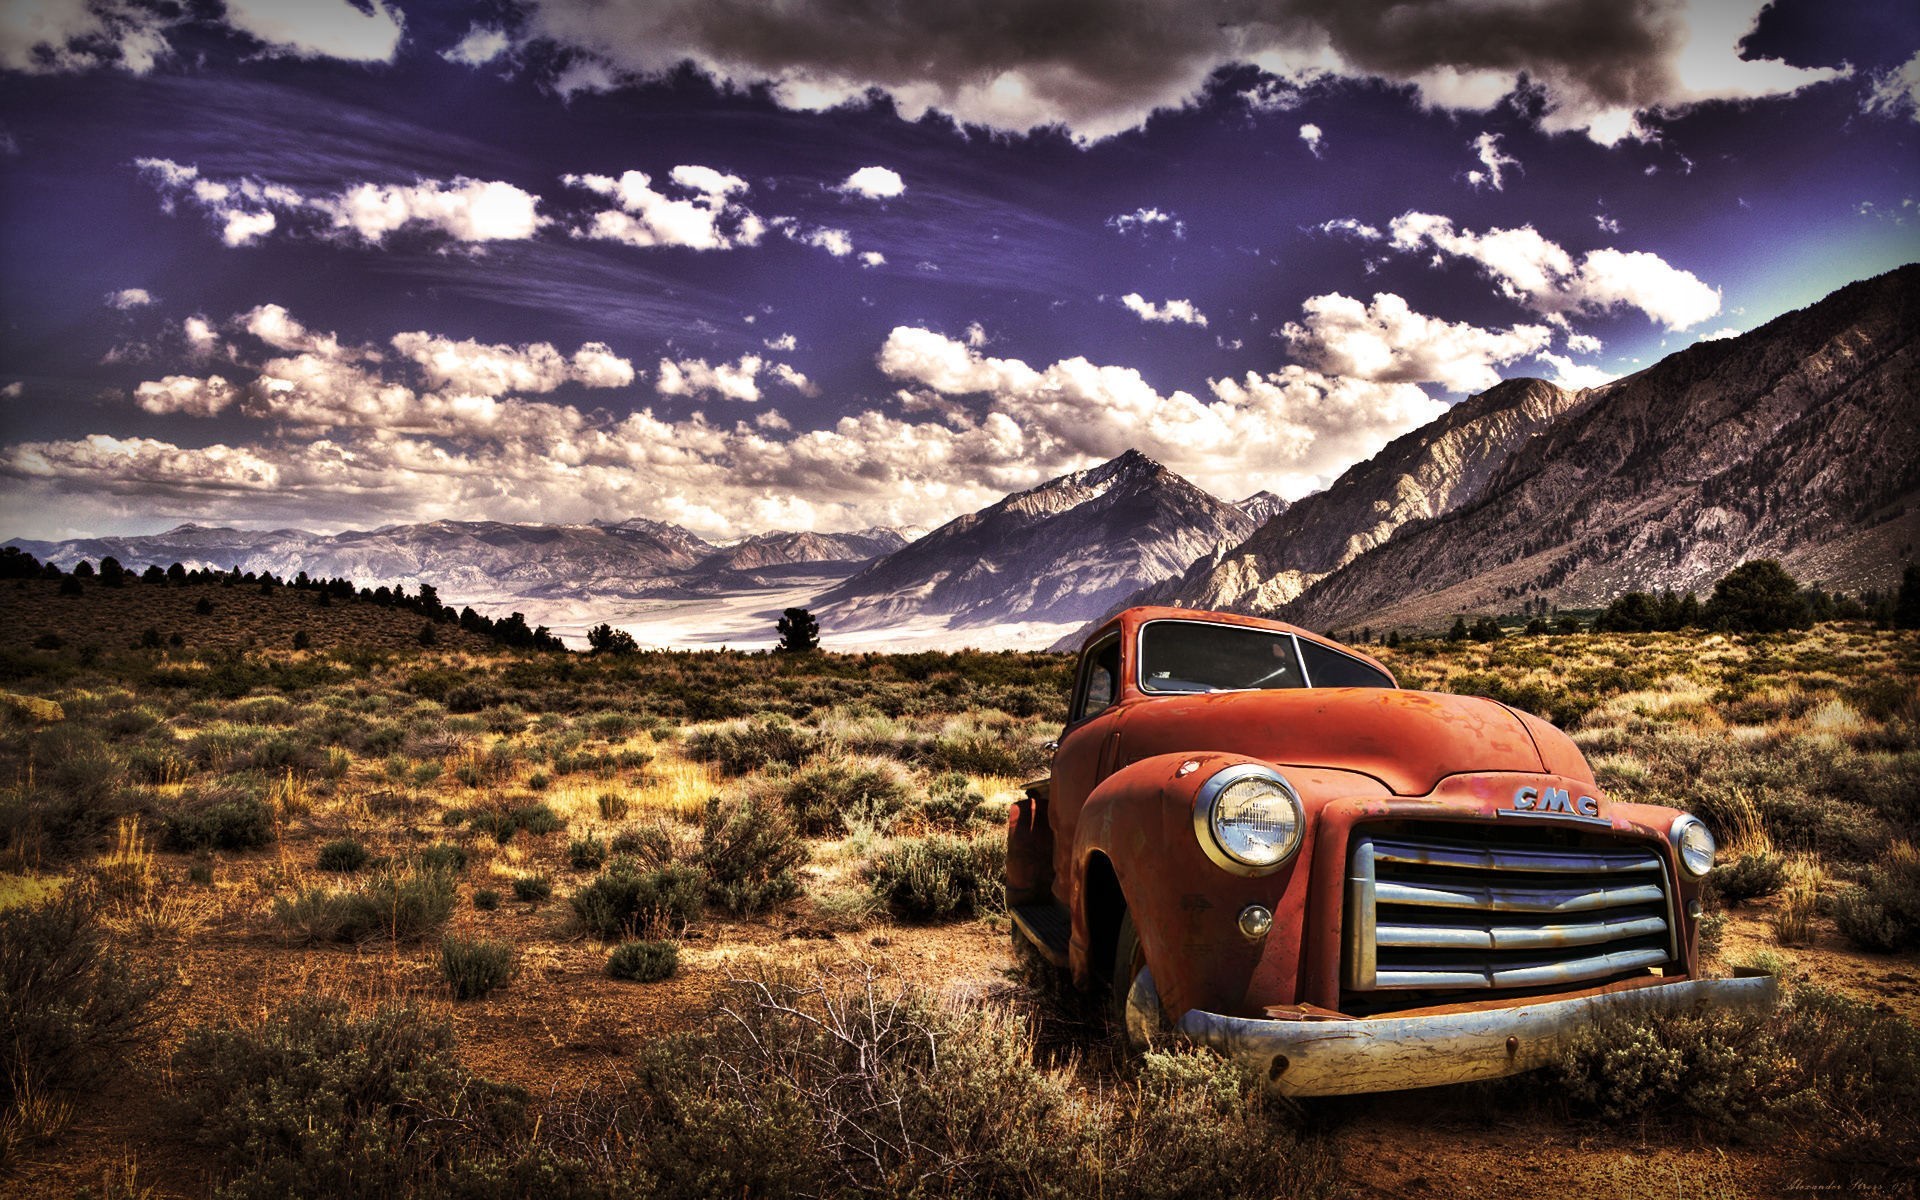 landscape, Nature, HDR, Mountains, Sky, Car, Vehicle, Clouds, Old car Wallpaper